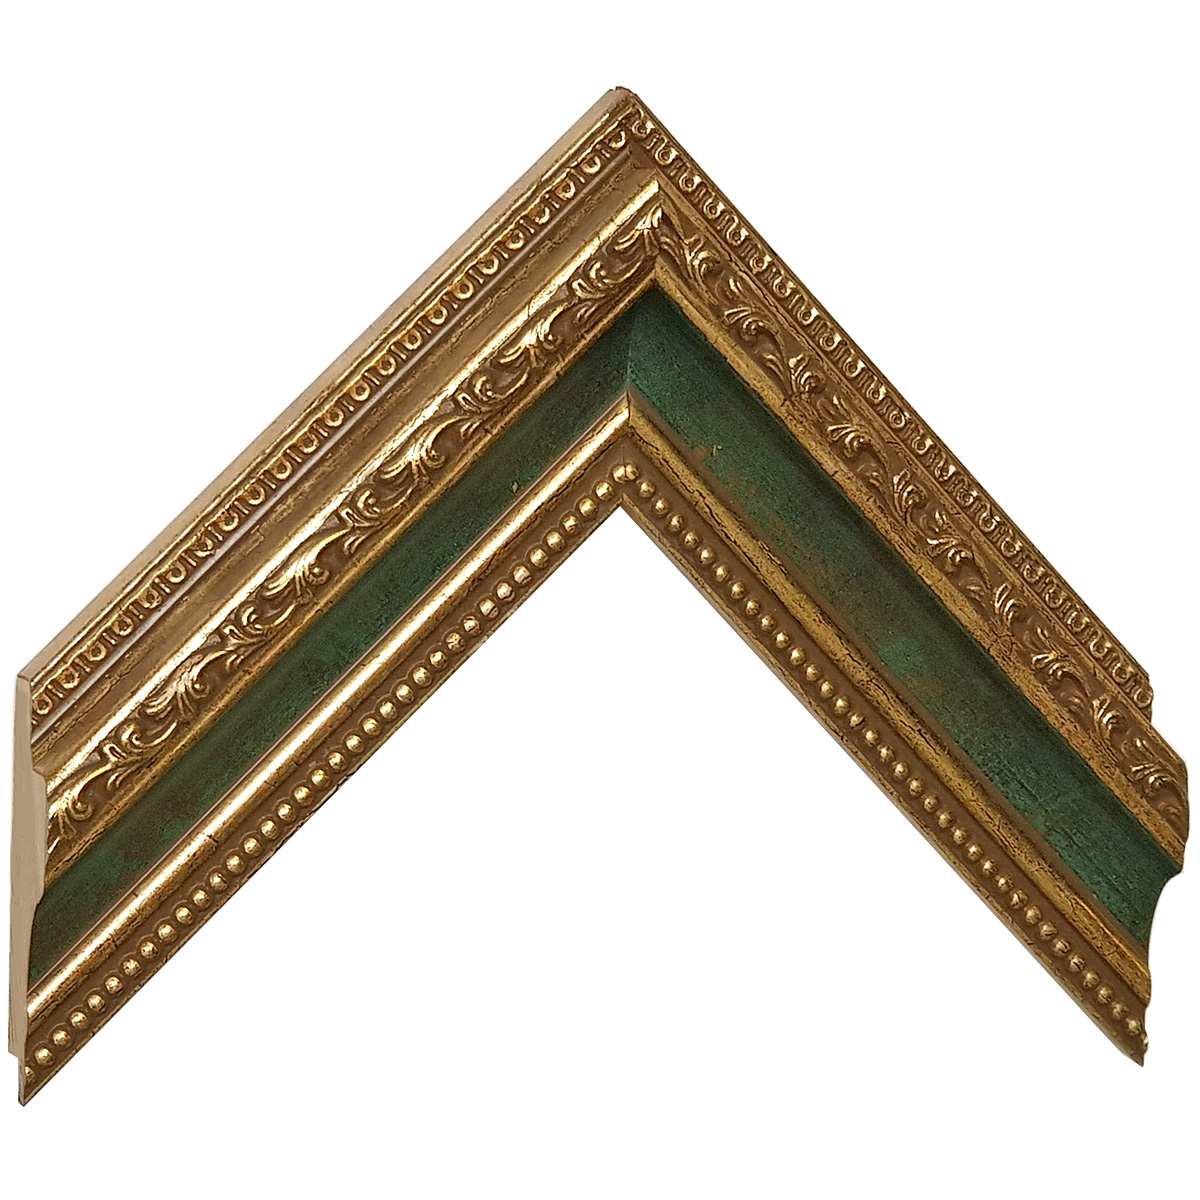 Moulding finger-jointed pine - width 53mm height 35 - gold, green band - Sample